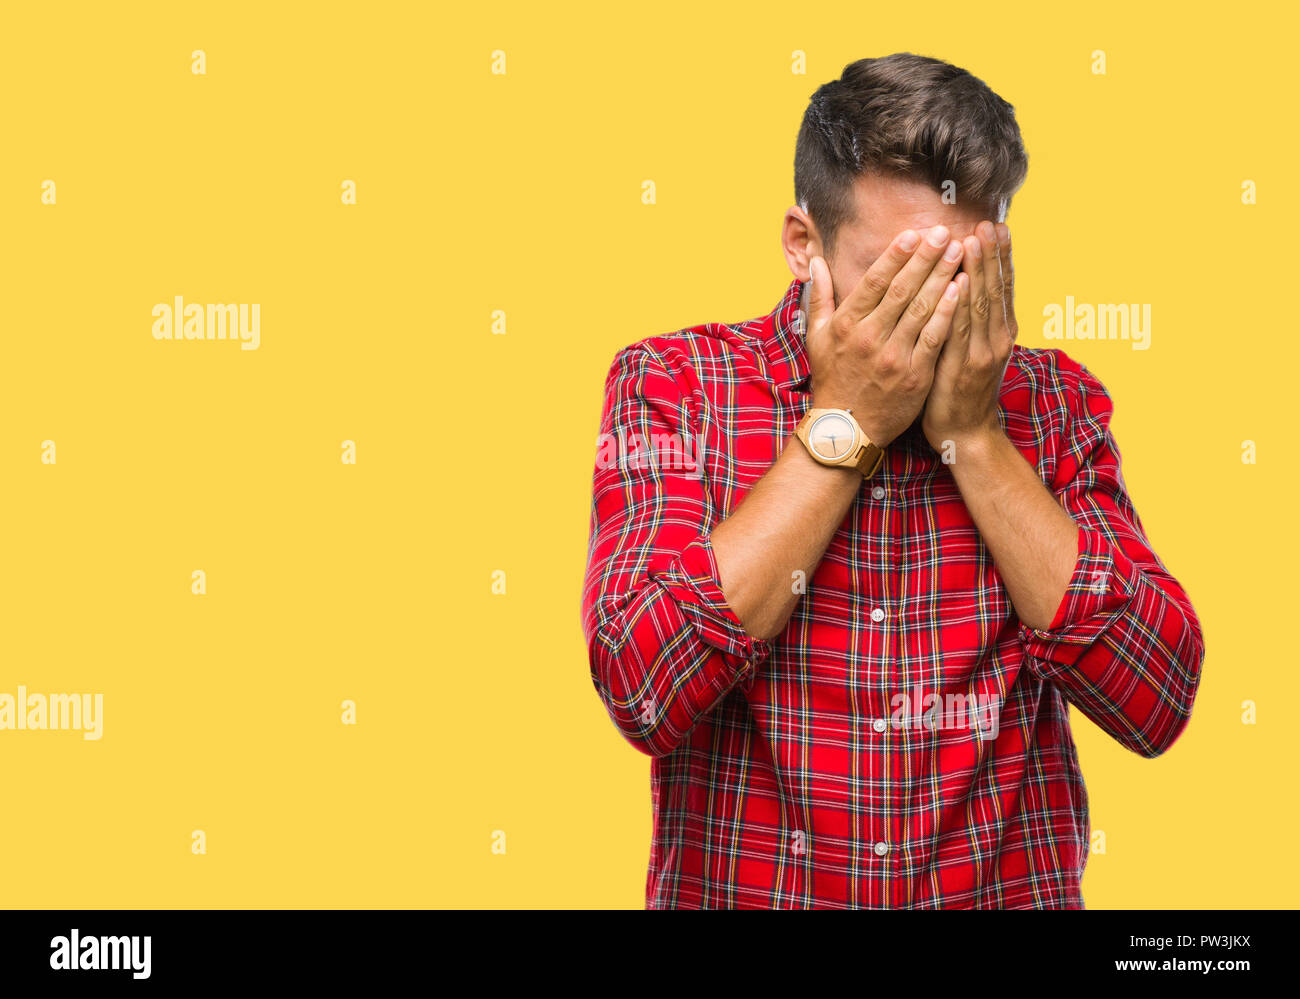 Young handsome man over isolated background with sad expression covering face with hands while crying. Depression concept. Stock Photo